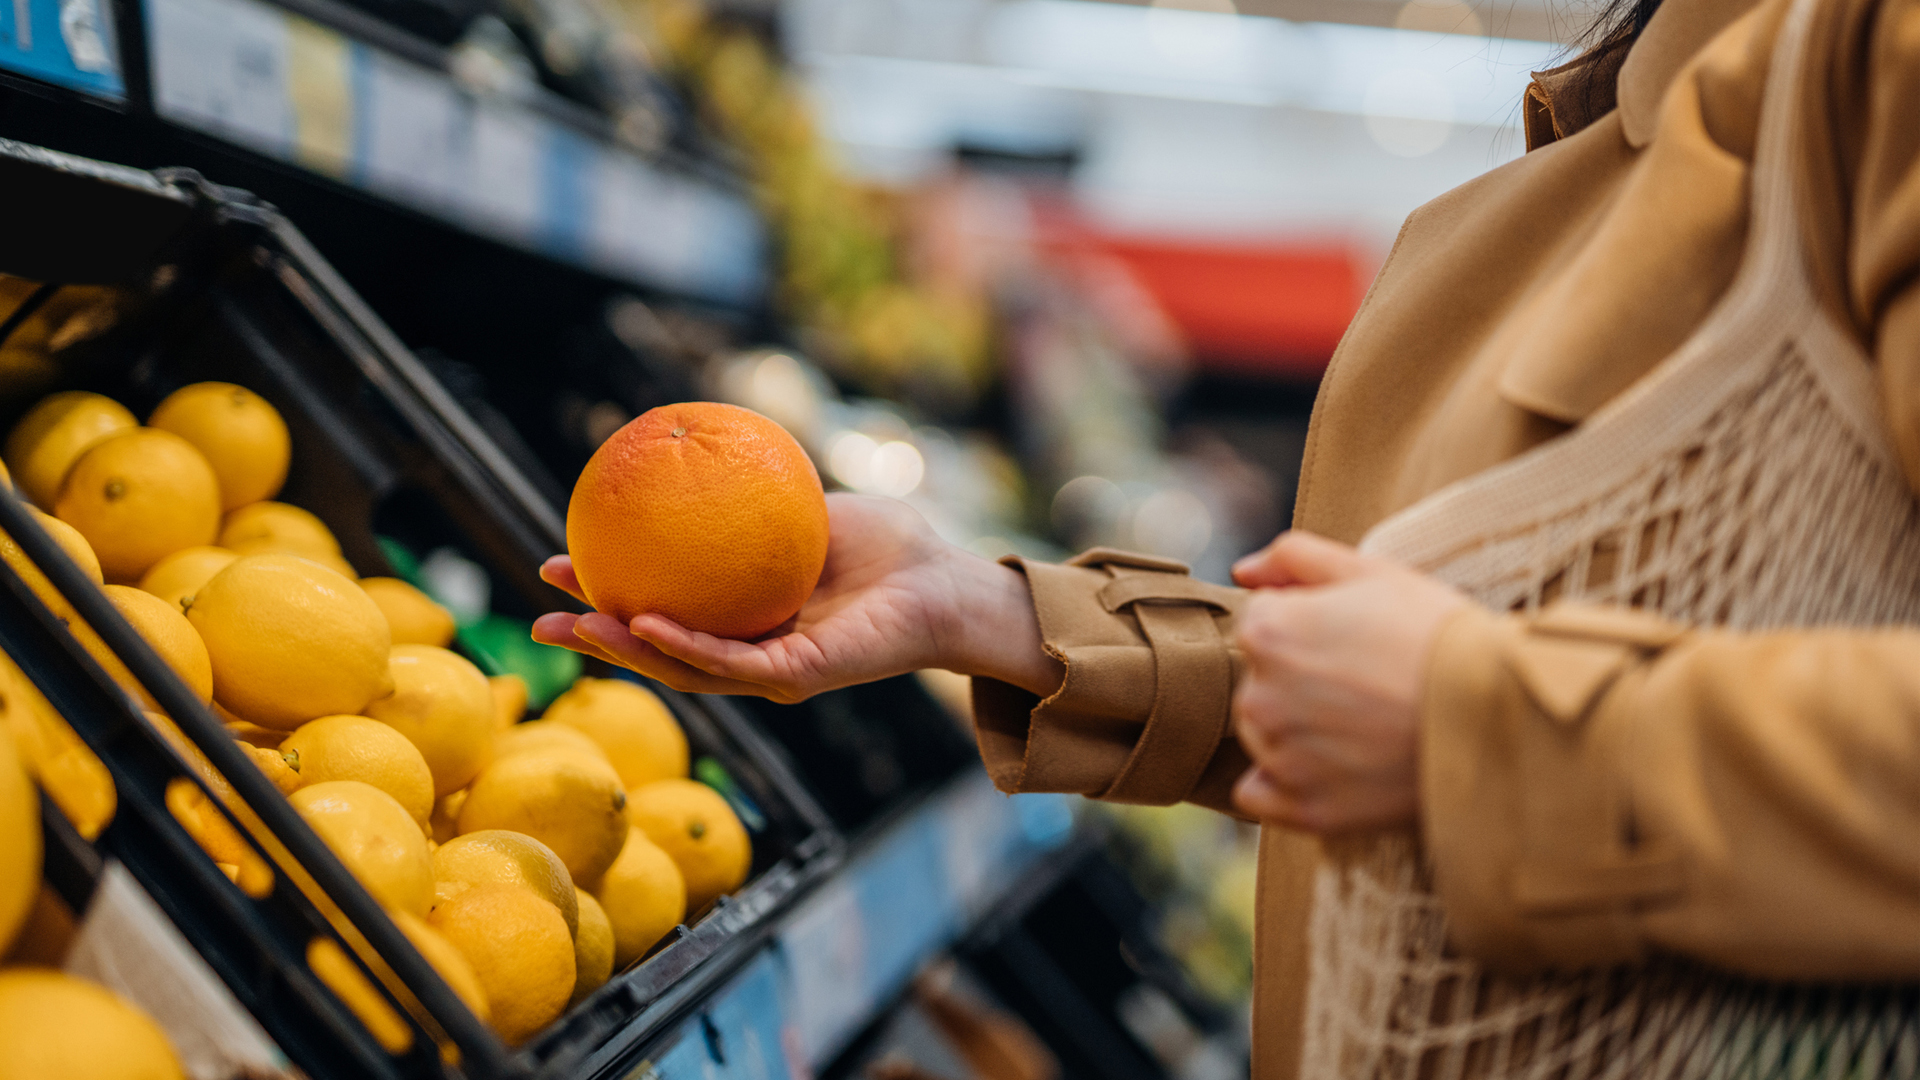 woman picking up an orange in the grocery store